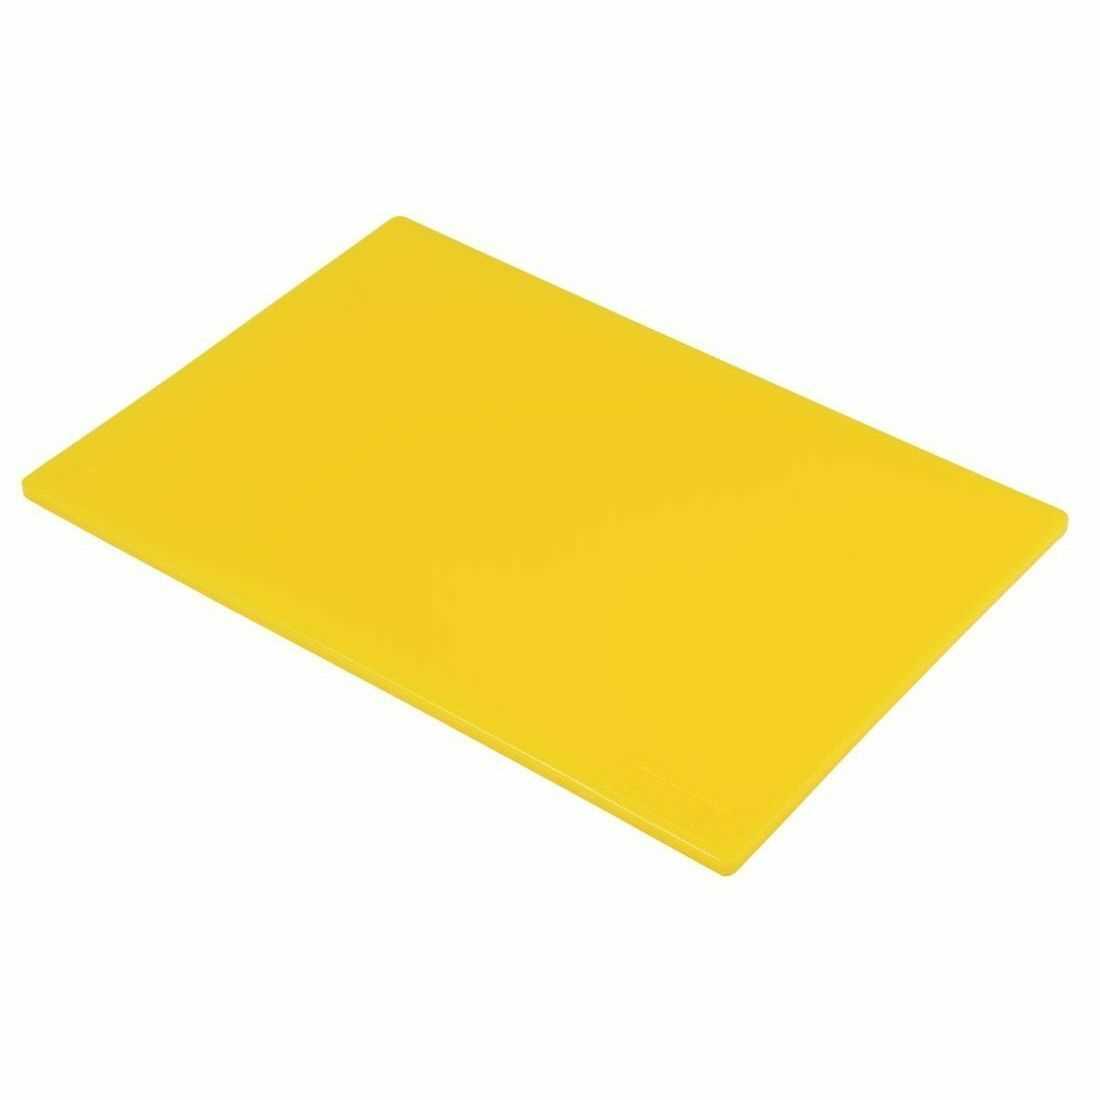 Yellow Kitchen Chopping Board Commercial Cutting Board Colour Coded Hygiene Catering Food Cutting Set